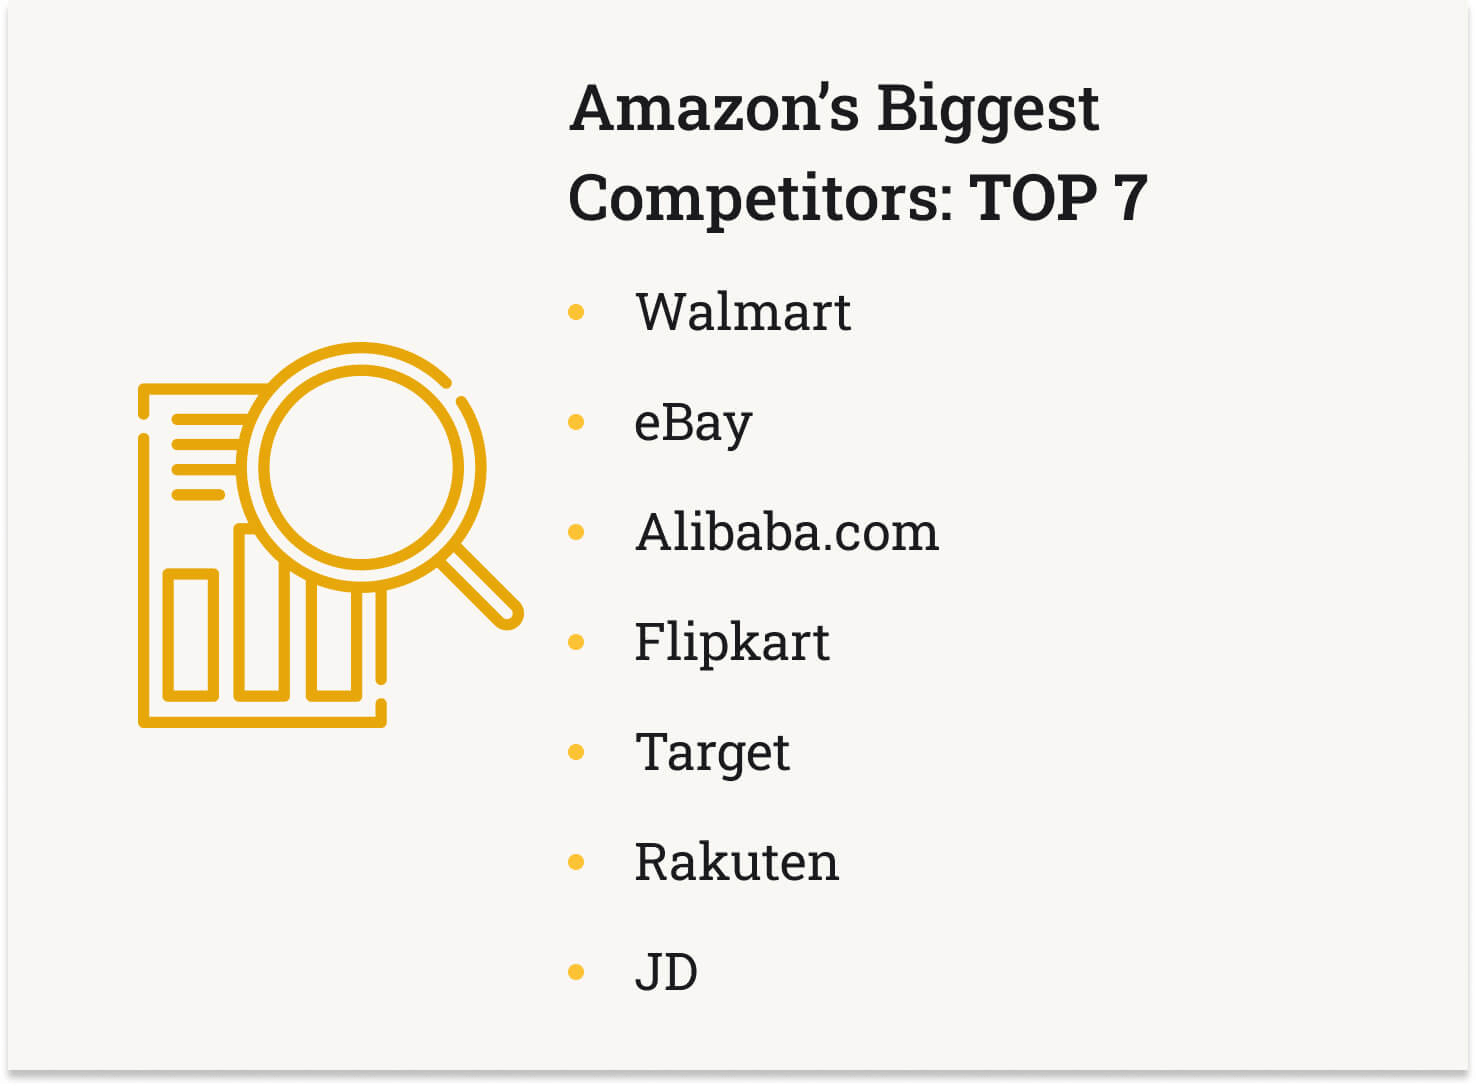 The picture introduces Amazon's 7 biggest competitors.